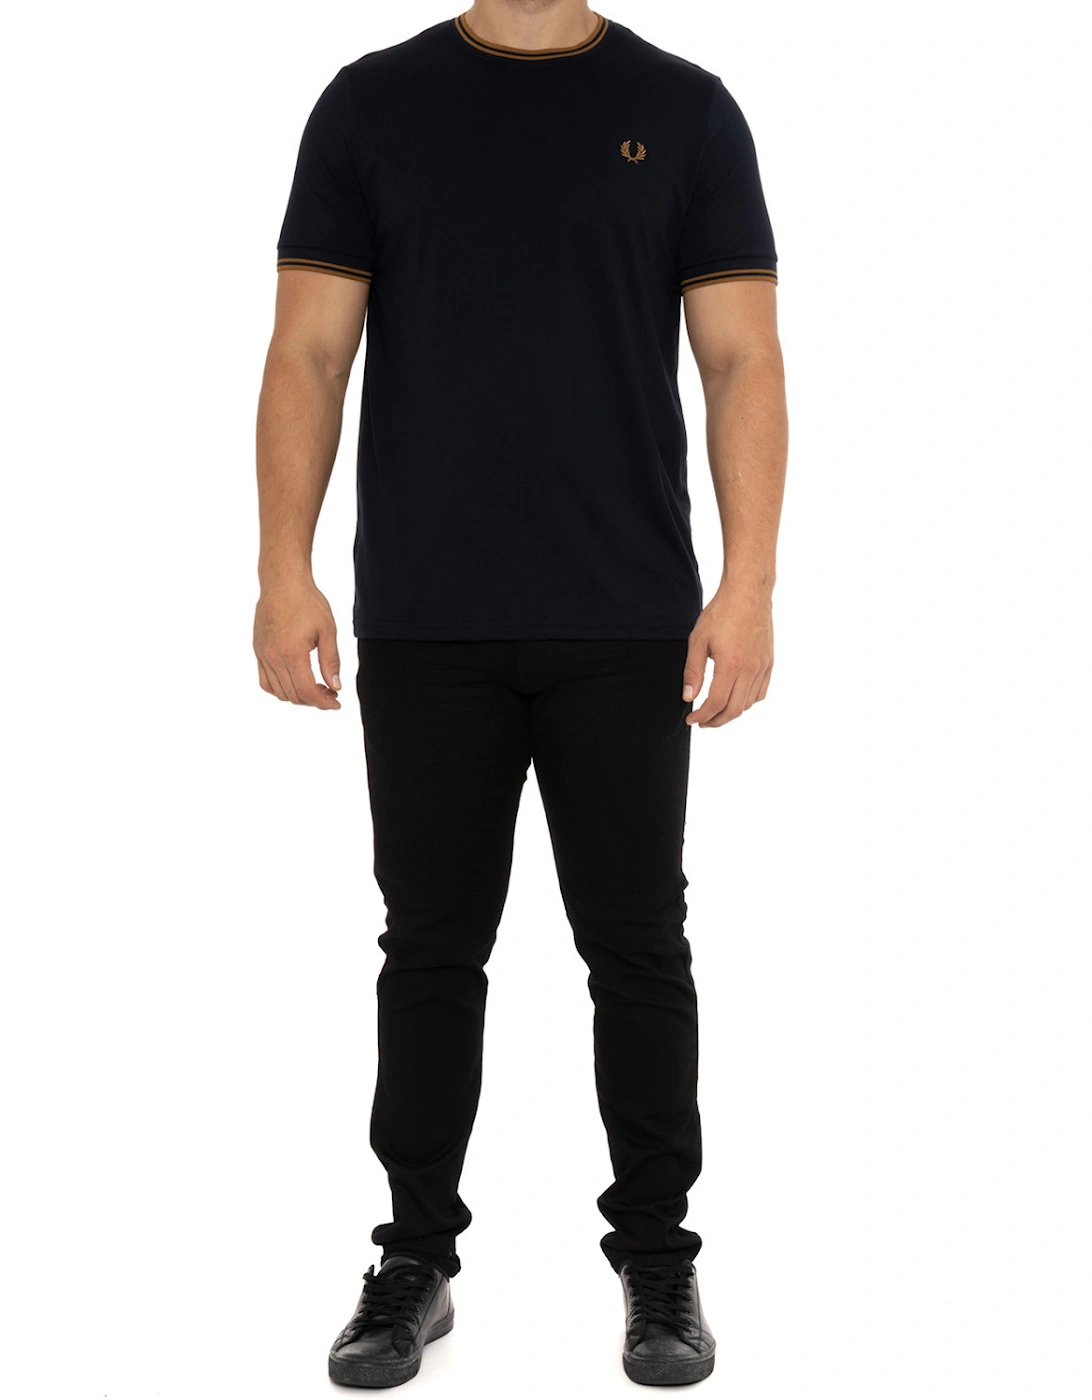 Mens Twin Tipped T-Shirt (Navy/Brown)